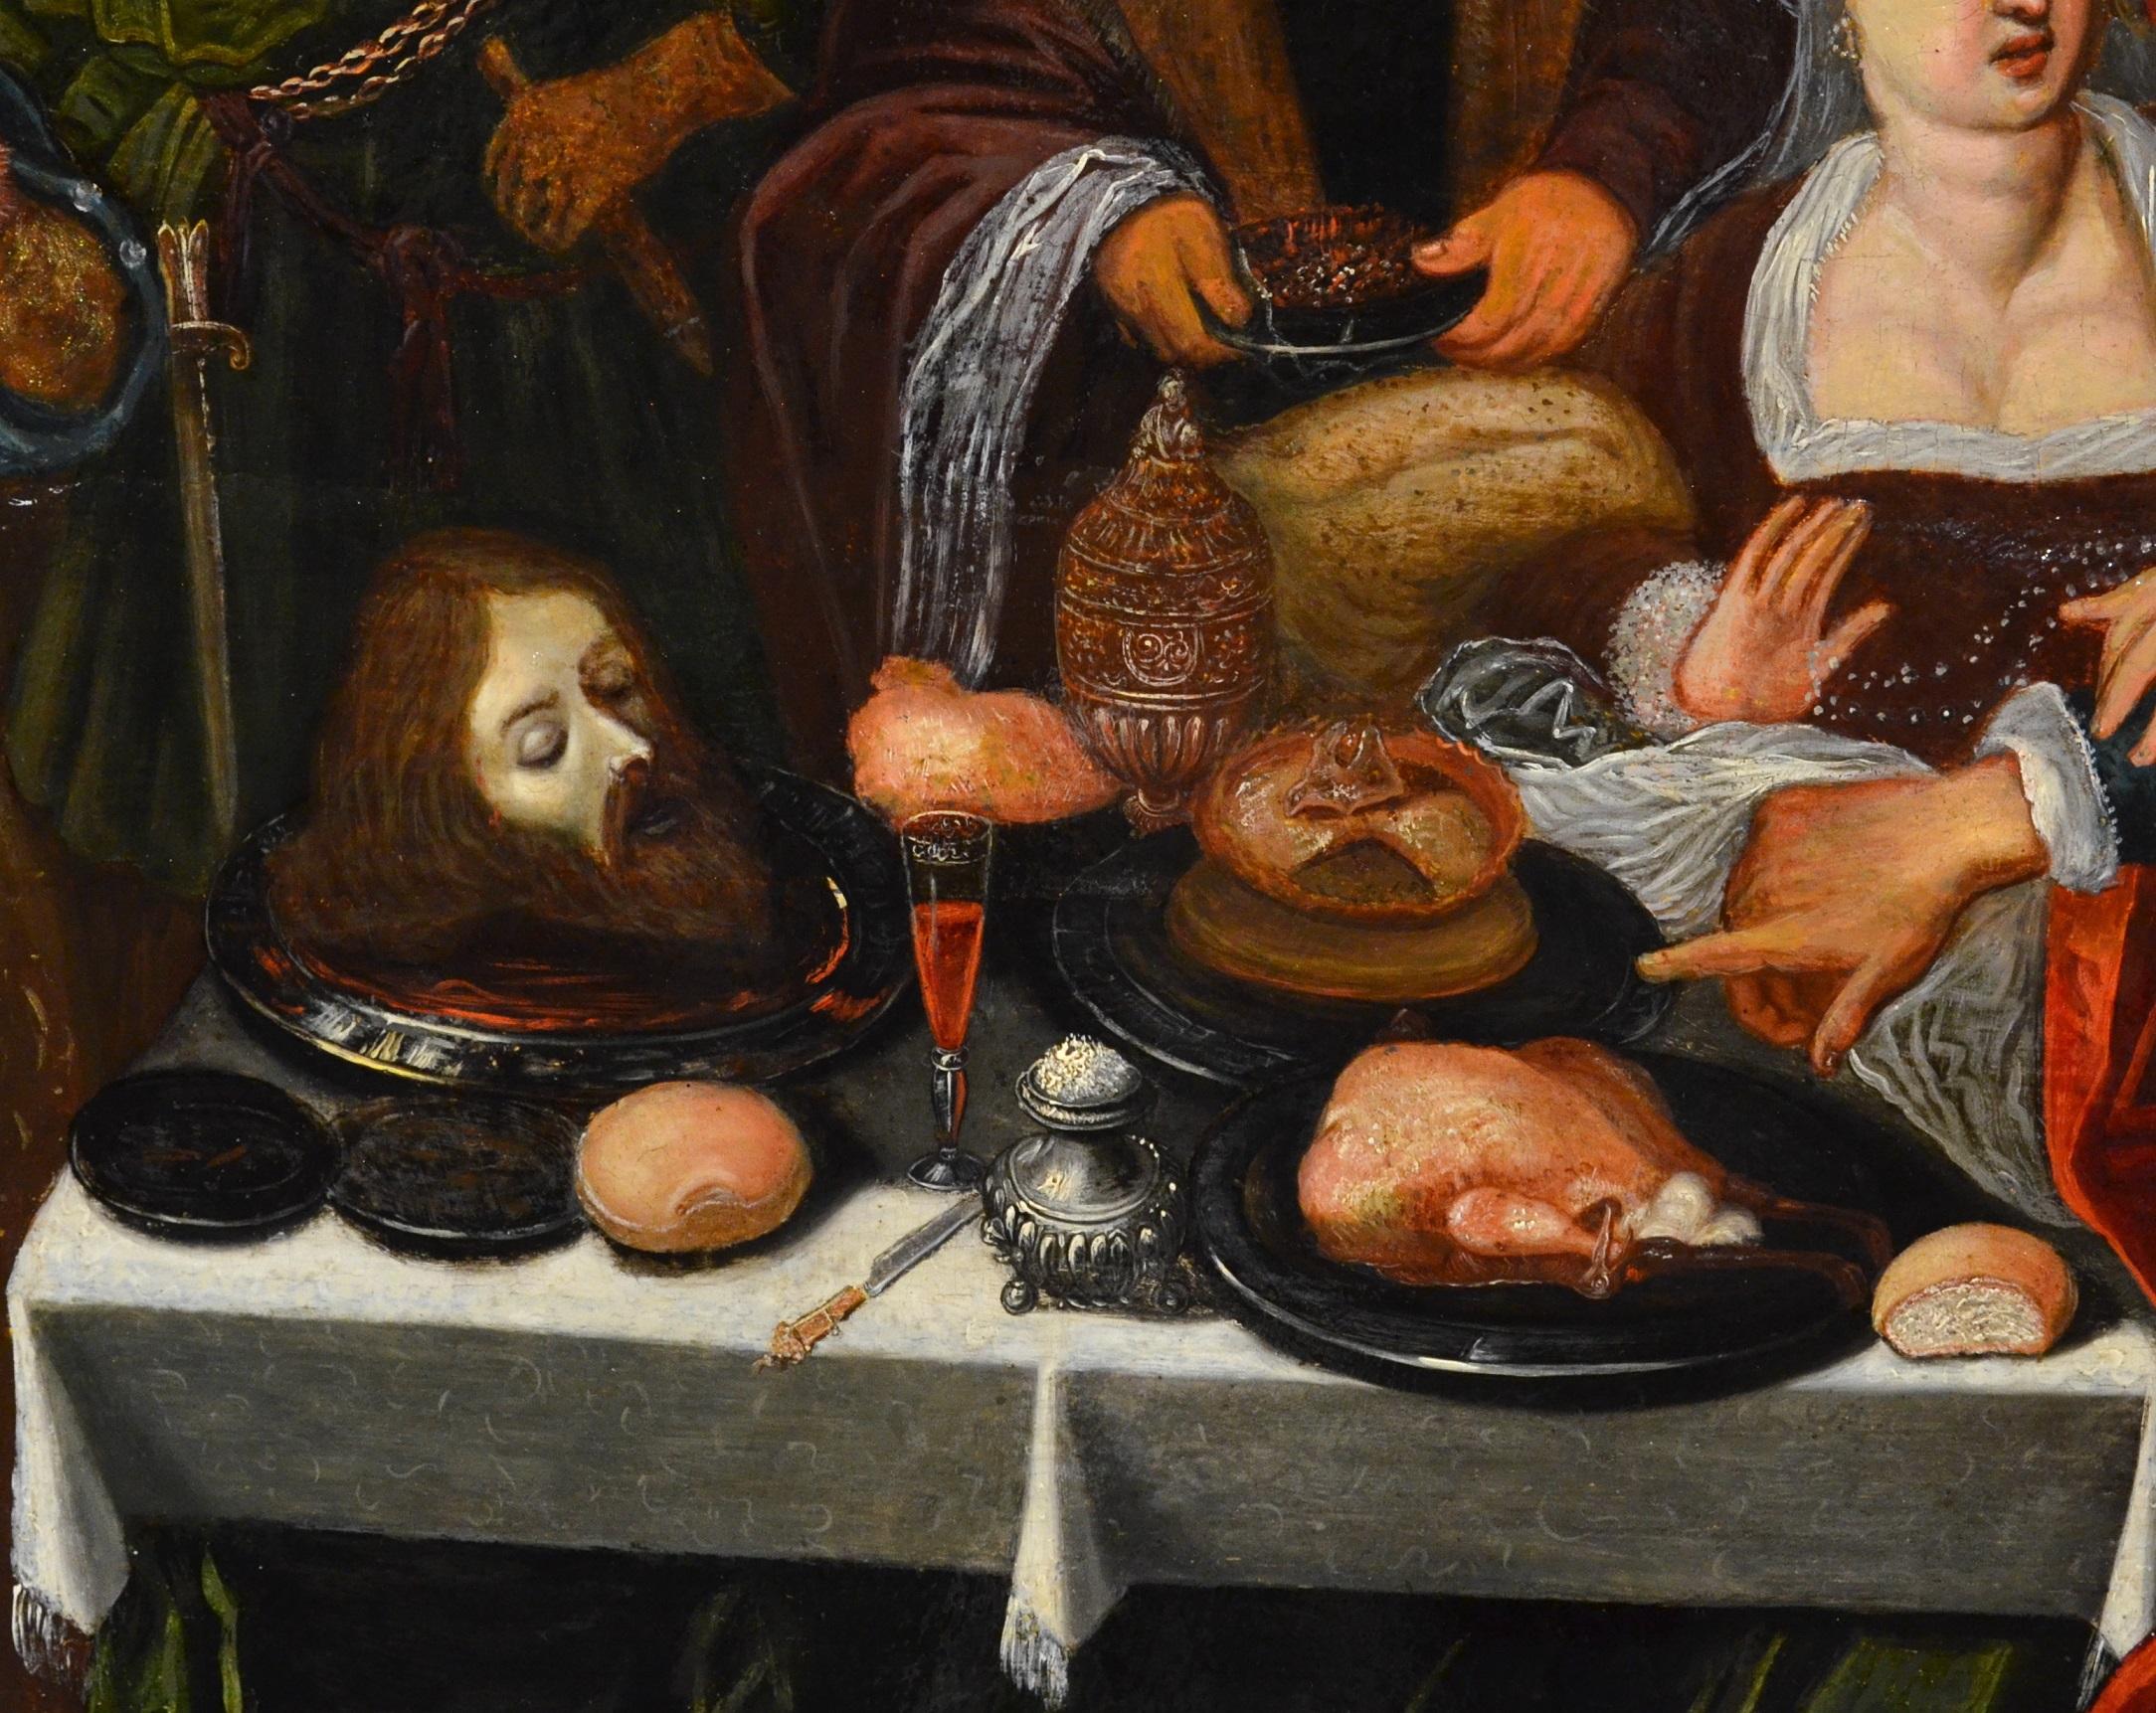 Banquet Attrib to Van Den Hoecke Religious Oil on Table Old Master 17th Century For Sale 8